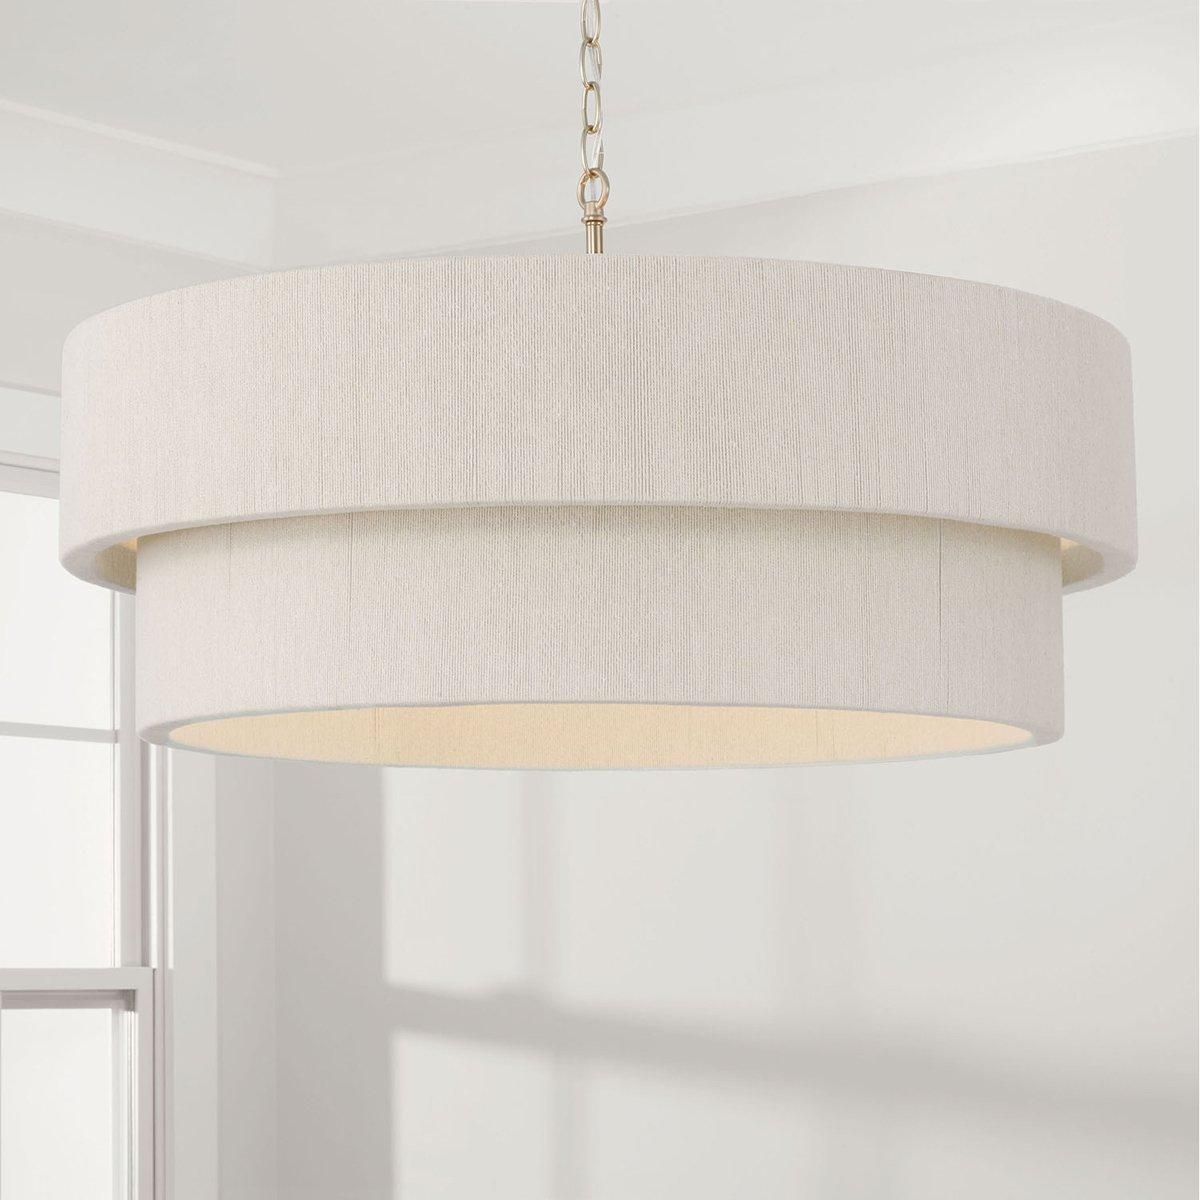 Kalini Double Drum Chandelier | Shades of Light